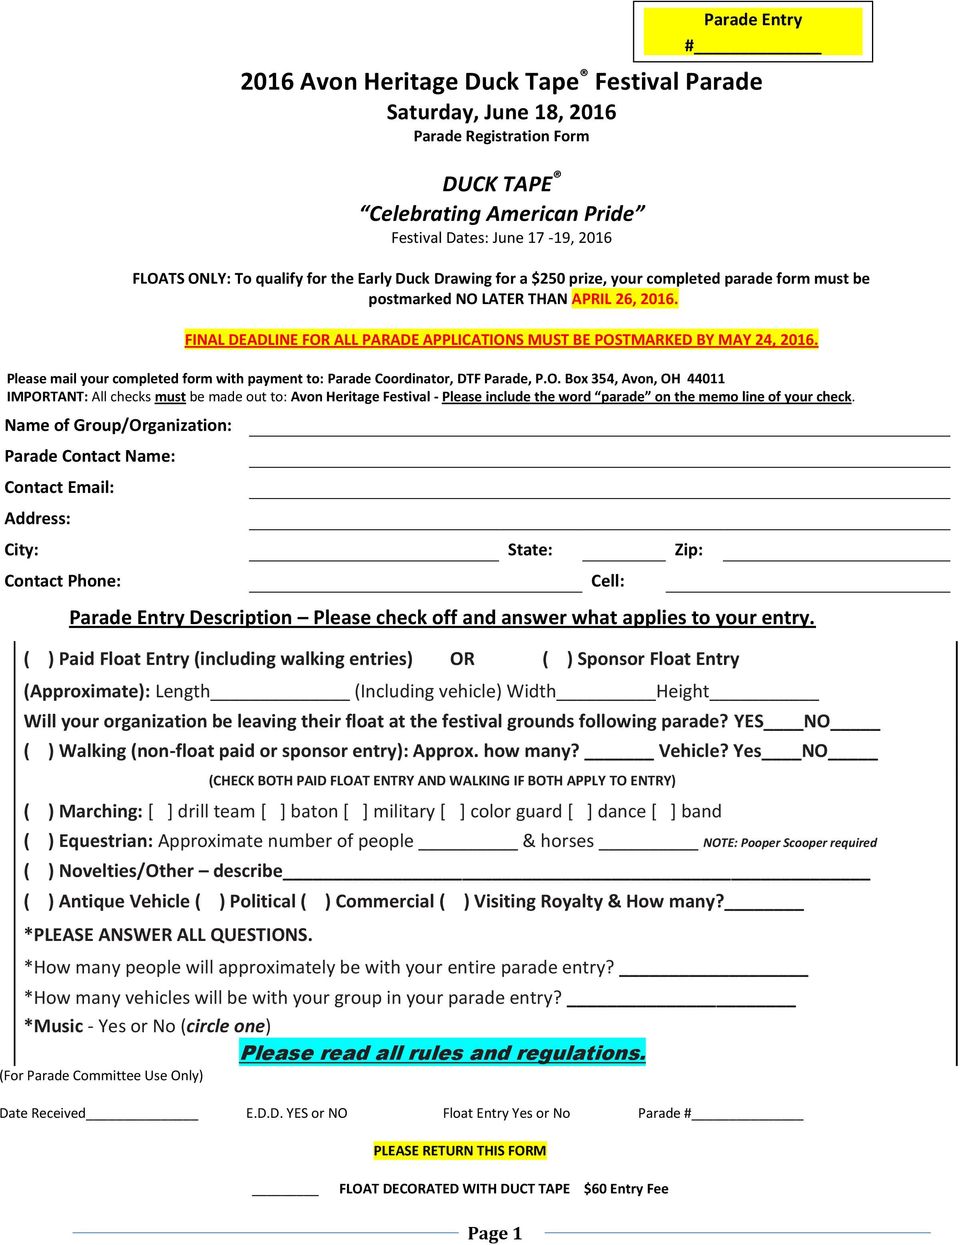 Please mail your completed form with payment to: Parade Coordinator, DTF Parade, P.O.